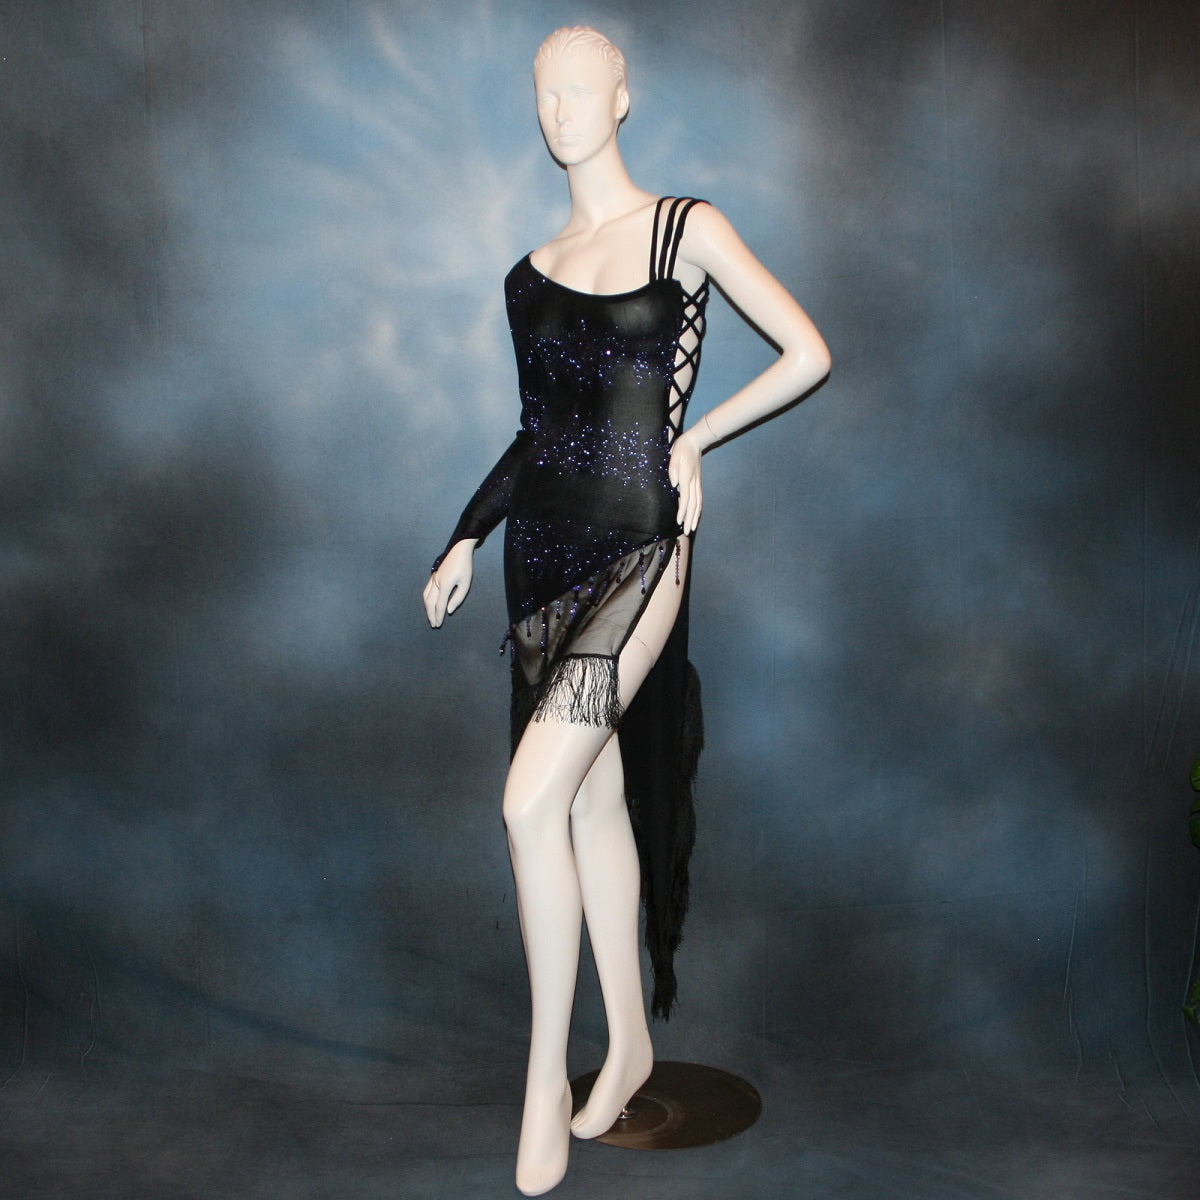 Latin/rhythm/tango dress created in black glitter slinky with an awesome electrifying tanzinite/perwinkle glitter pattern! It features one long sleeve, lattice work detailing up the left side, a short skirt line in front that angles down to a long peak in the back, with a sheer mesh inset, fringe & Swarovski hand beading in tanzanite & black.